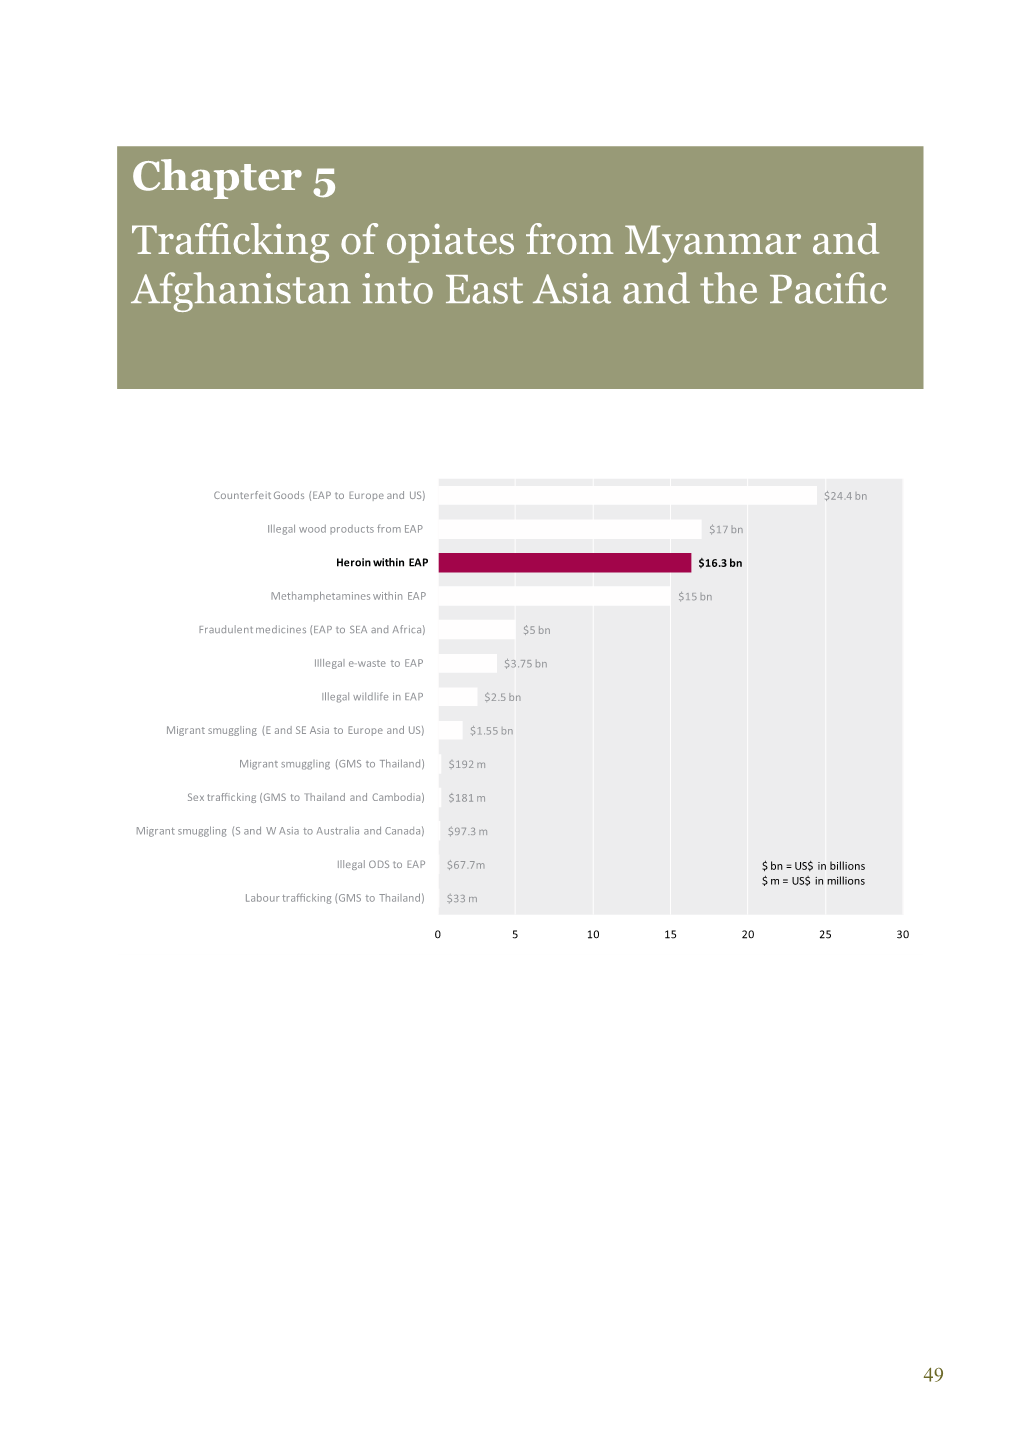 Chapter 5 Trafficking of Opiates from Myanmar and Afghanistan Into East